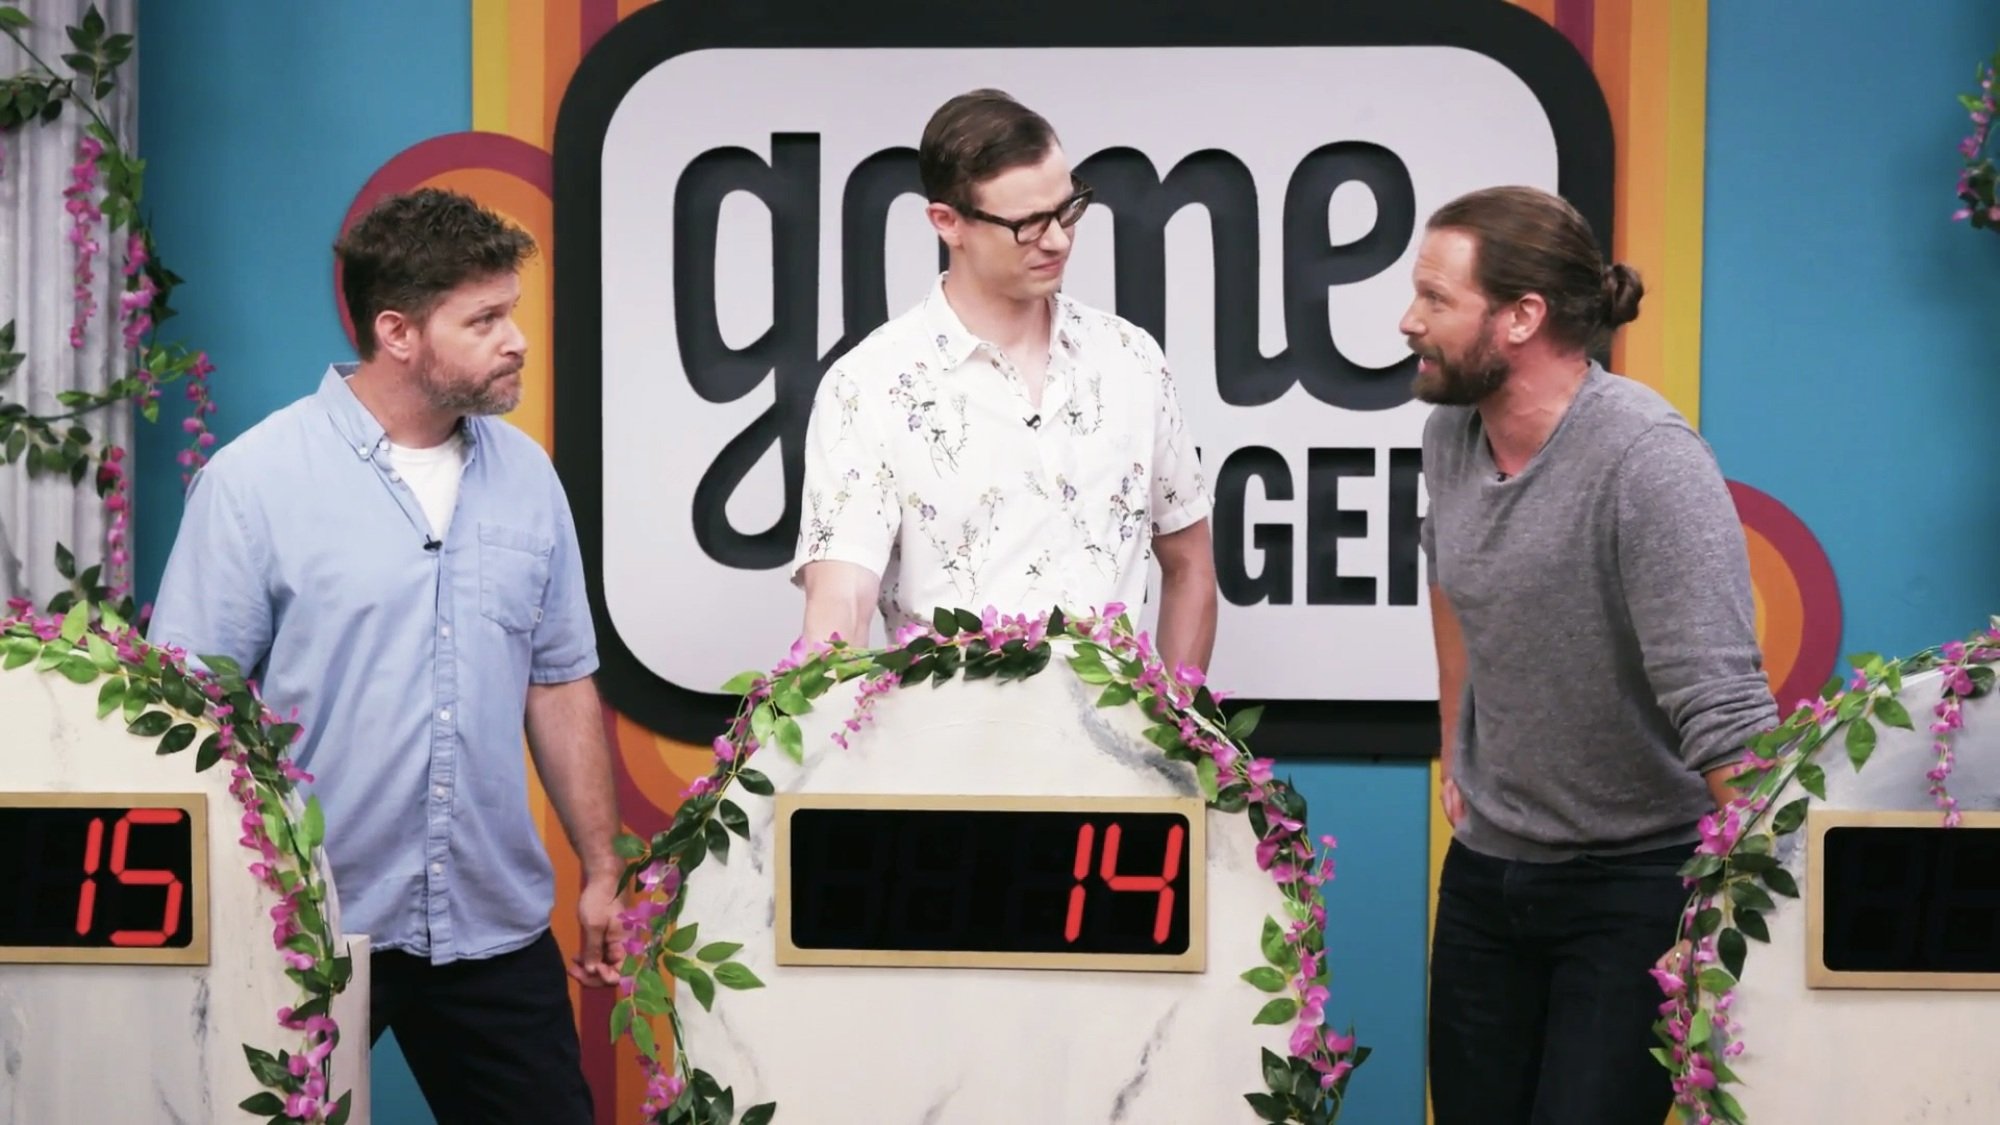 Three game show contestants perform an improvised Shakespeare scene.